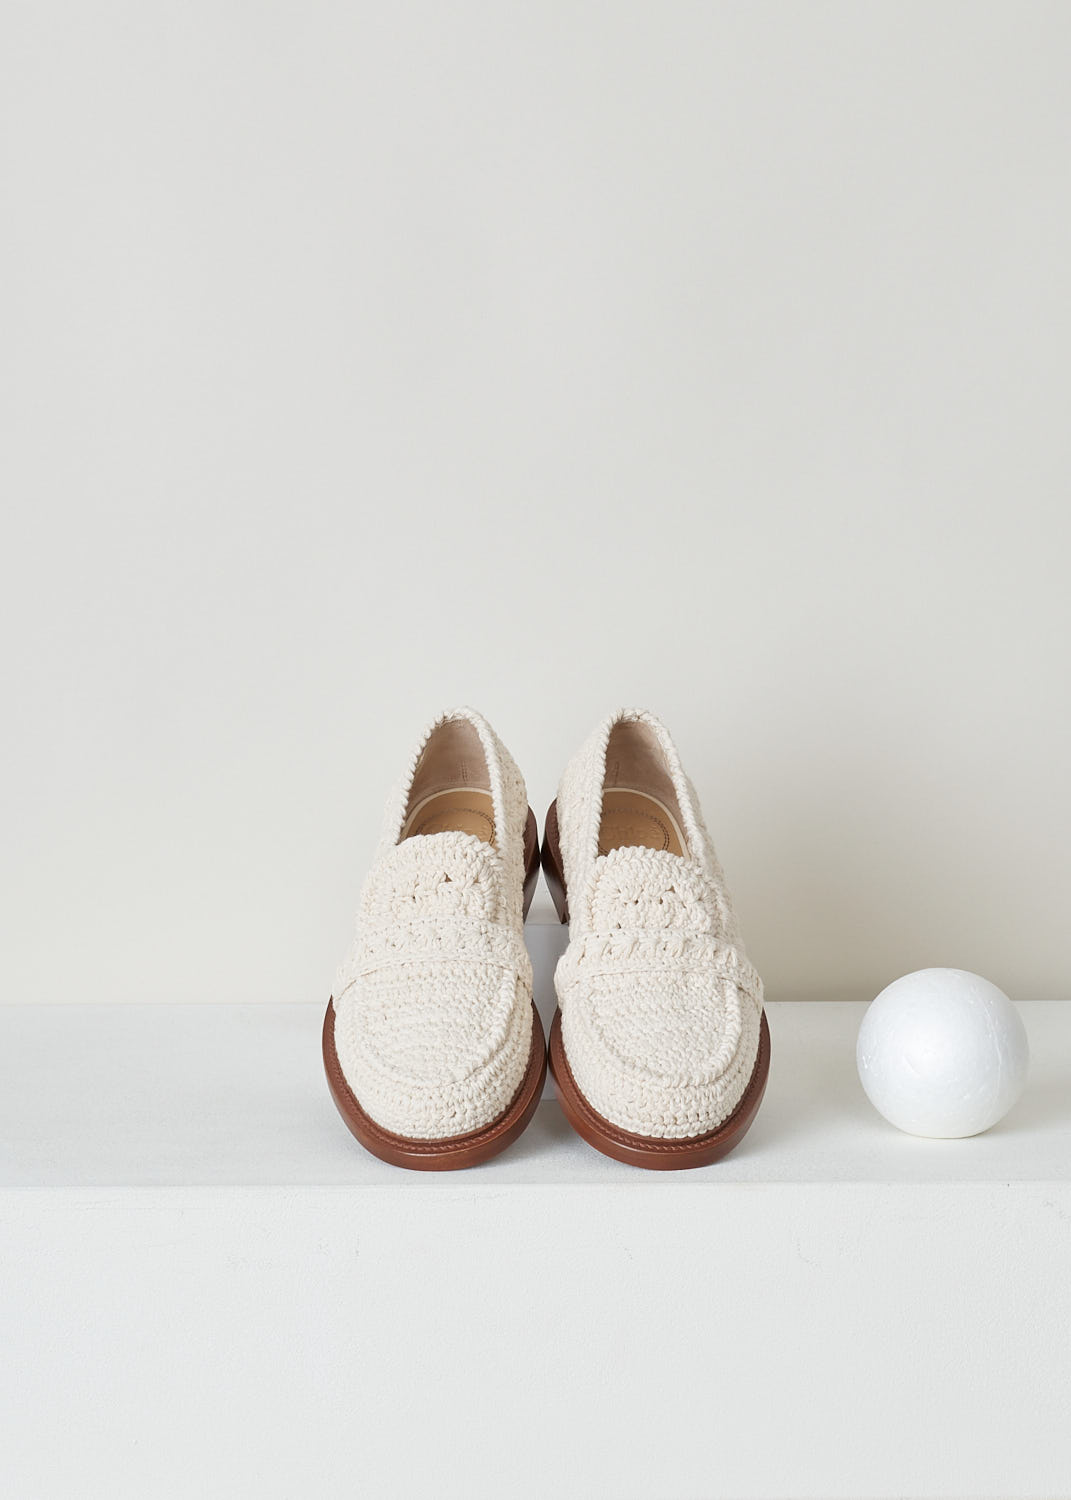 CHLOÃ‰, BEIGE CROCHET LOAFERS, 
CHC22S584X0122_KALYA_FLAT_LOAFERS_122_EGGSHELL, Beige, Top, These beige crochet loafers have a slip-on style with a round toe. The shoes have a sleek brown sole.
